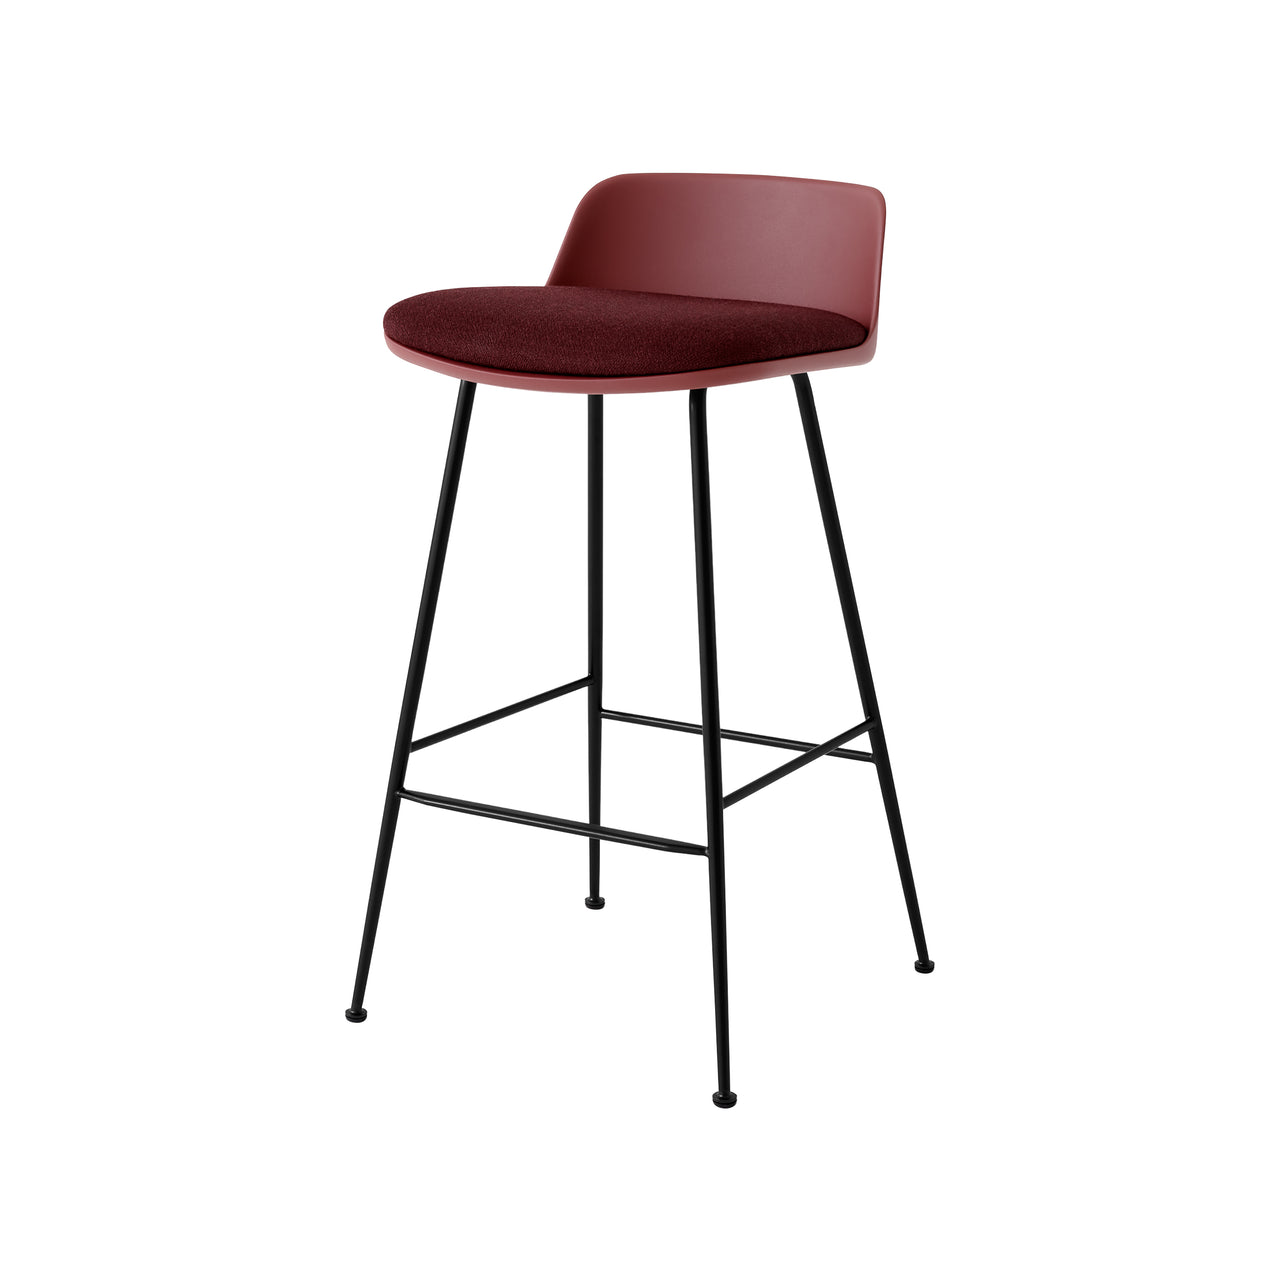 Rely Counter Stool: HW82 + Red Brown + Black